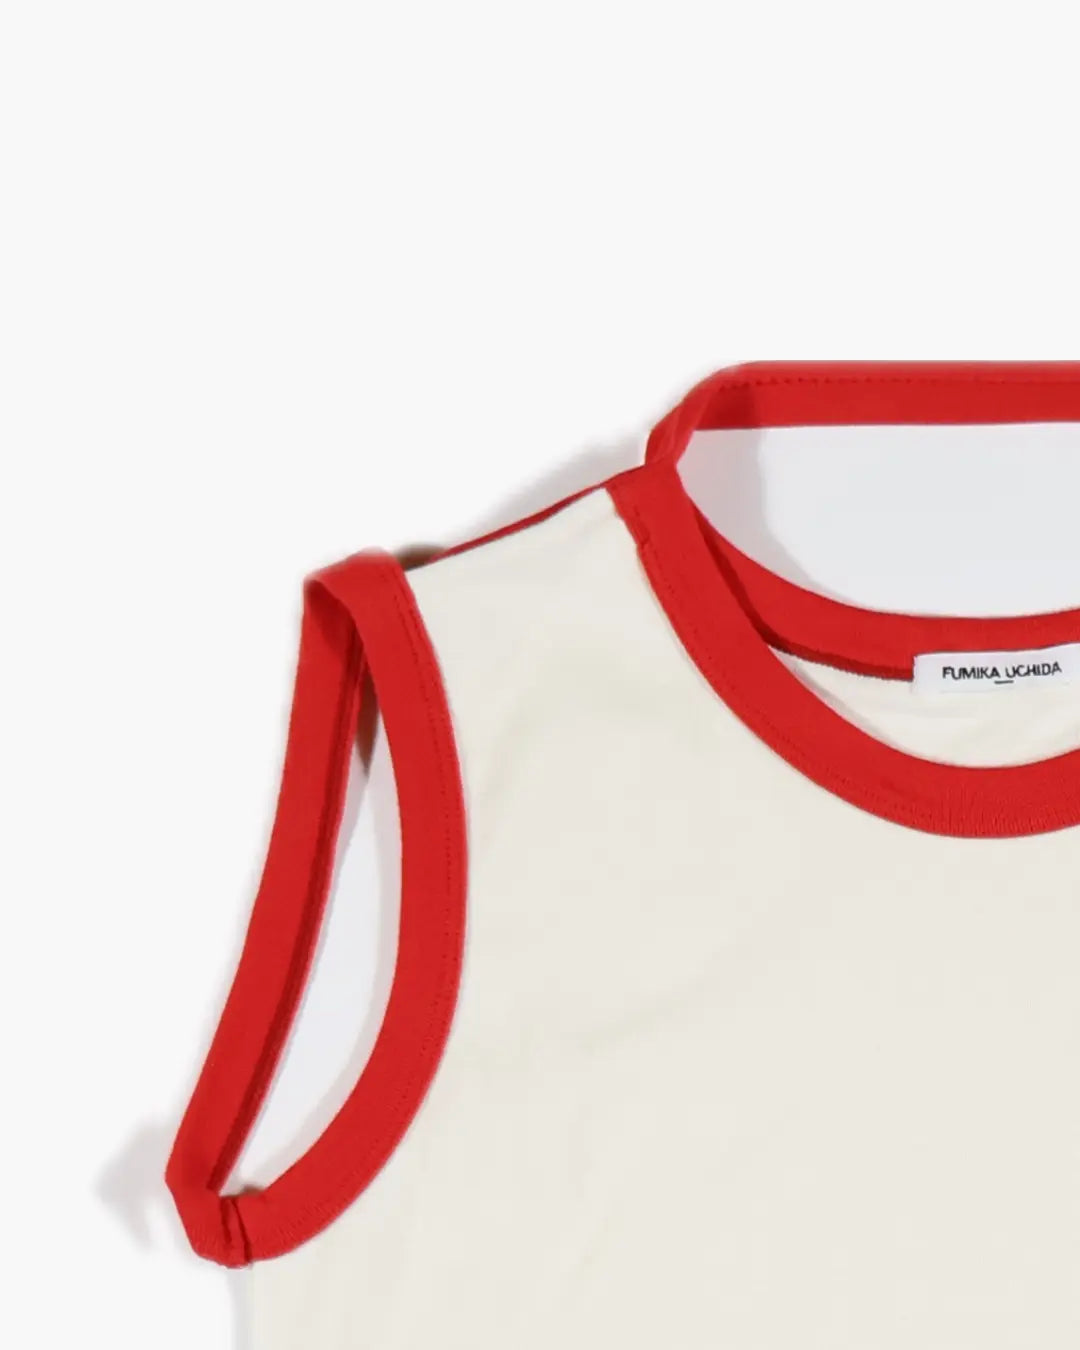 FUMIKA_UCHIDA / TRIMMED APRON TEE / OFFWHITE/RED